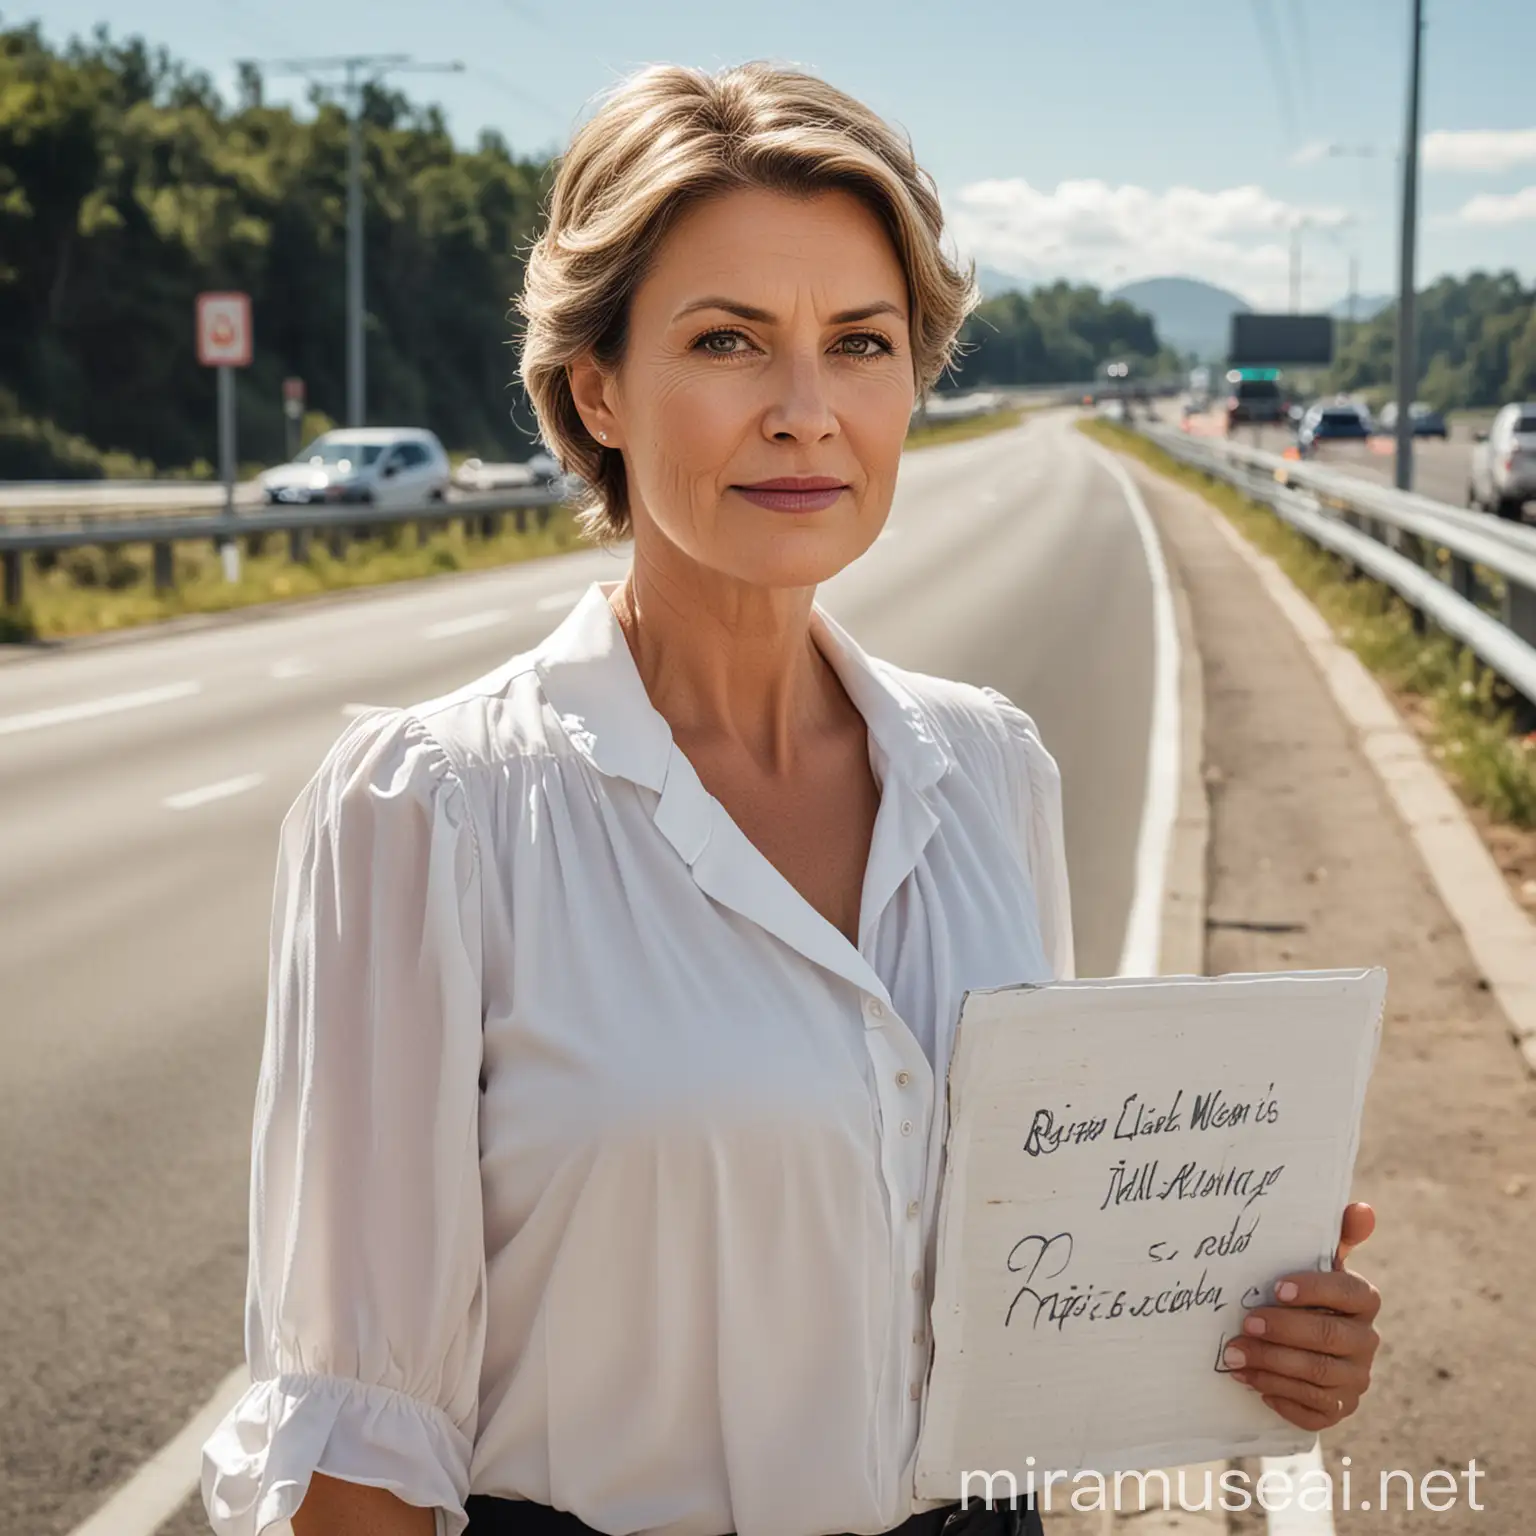 MiddleAged Woman with Bust Wearing White Blouse by Highway